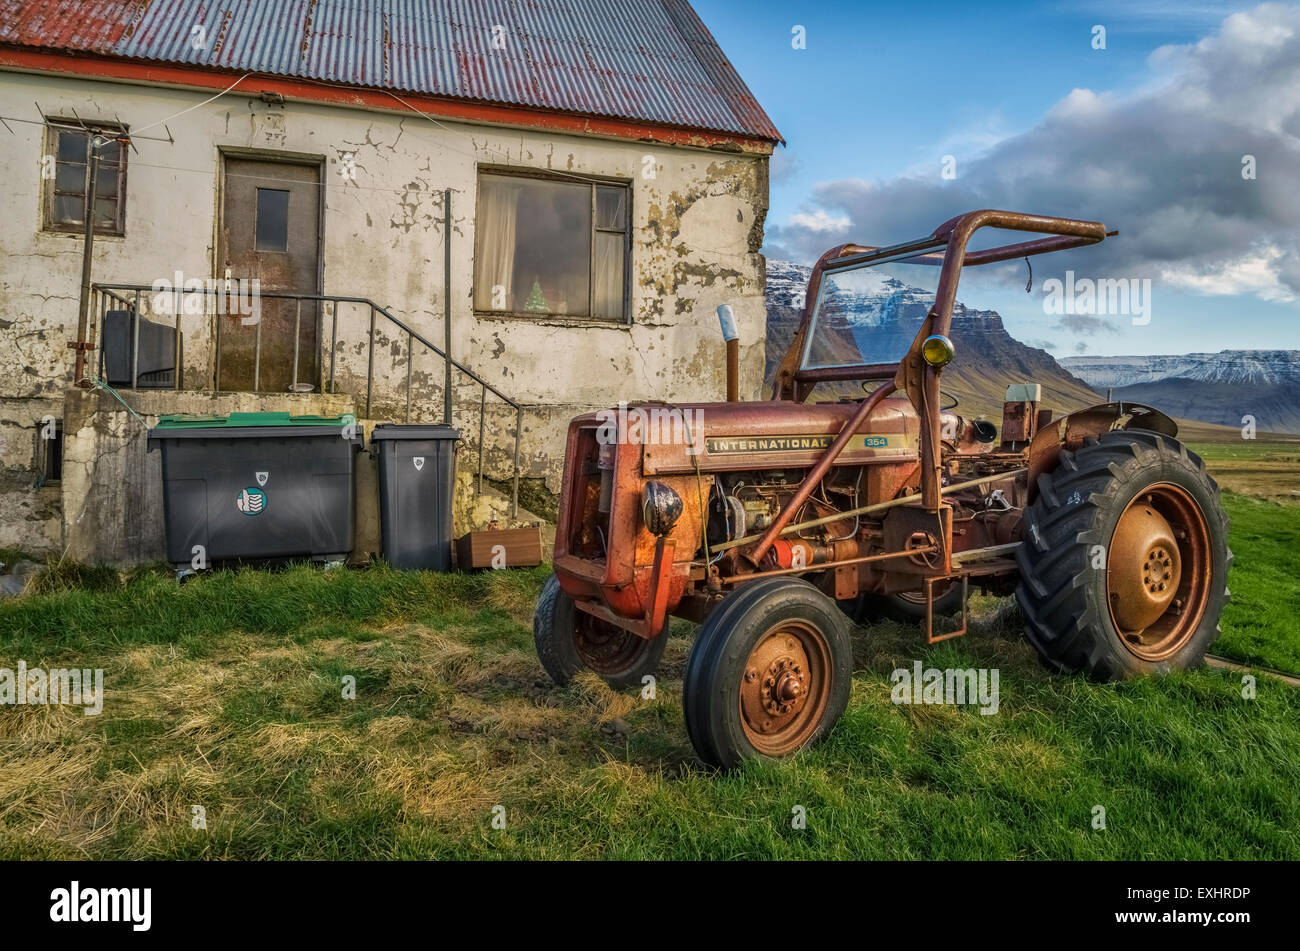 Old tractor in front of decaying farmhouse, Western Iceland Stock Photo